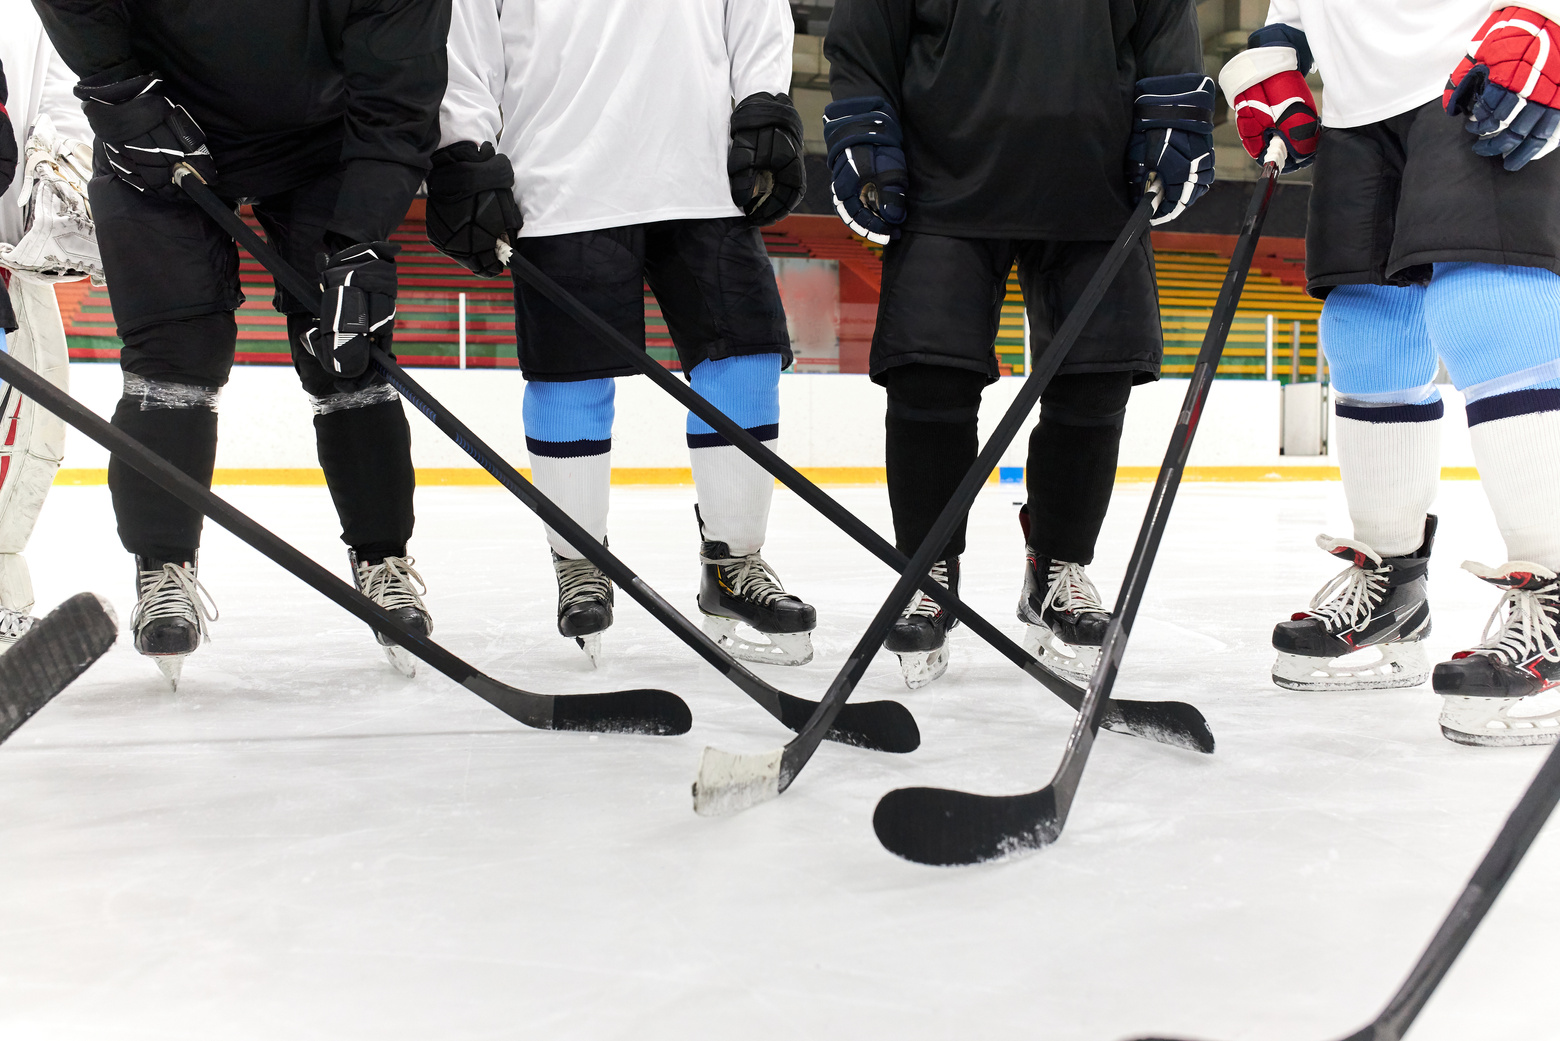 People Standing on Ice Rink while Holding Hockey Sticks